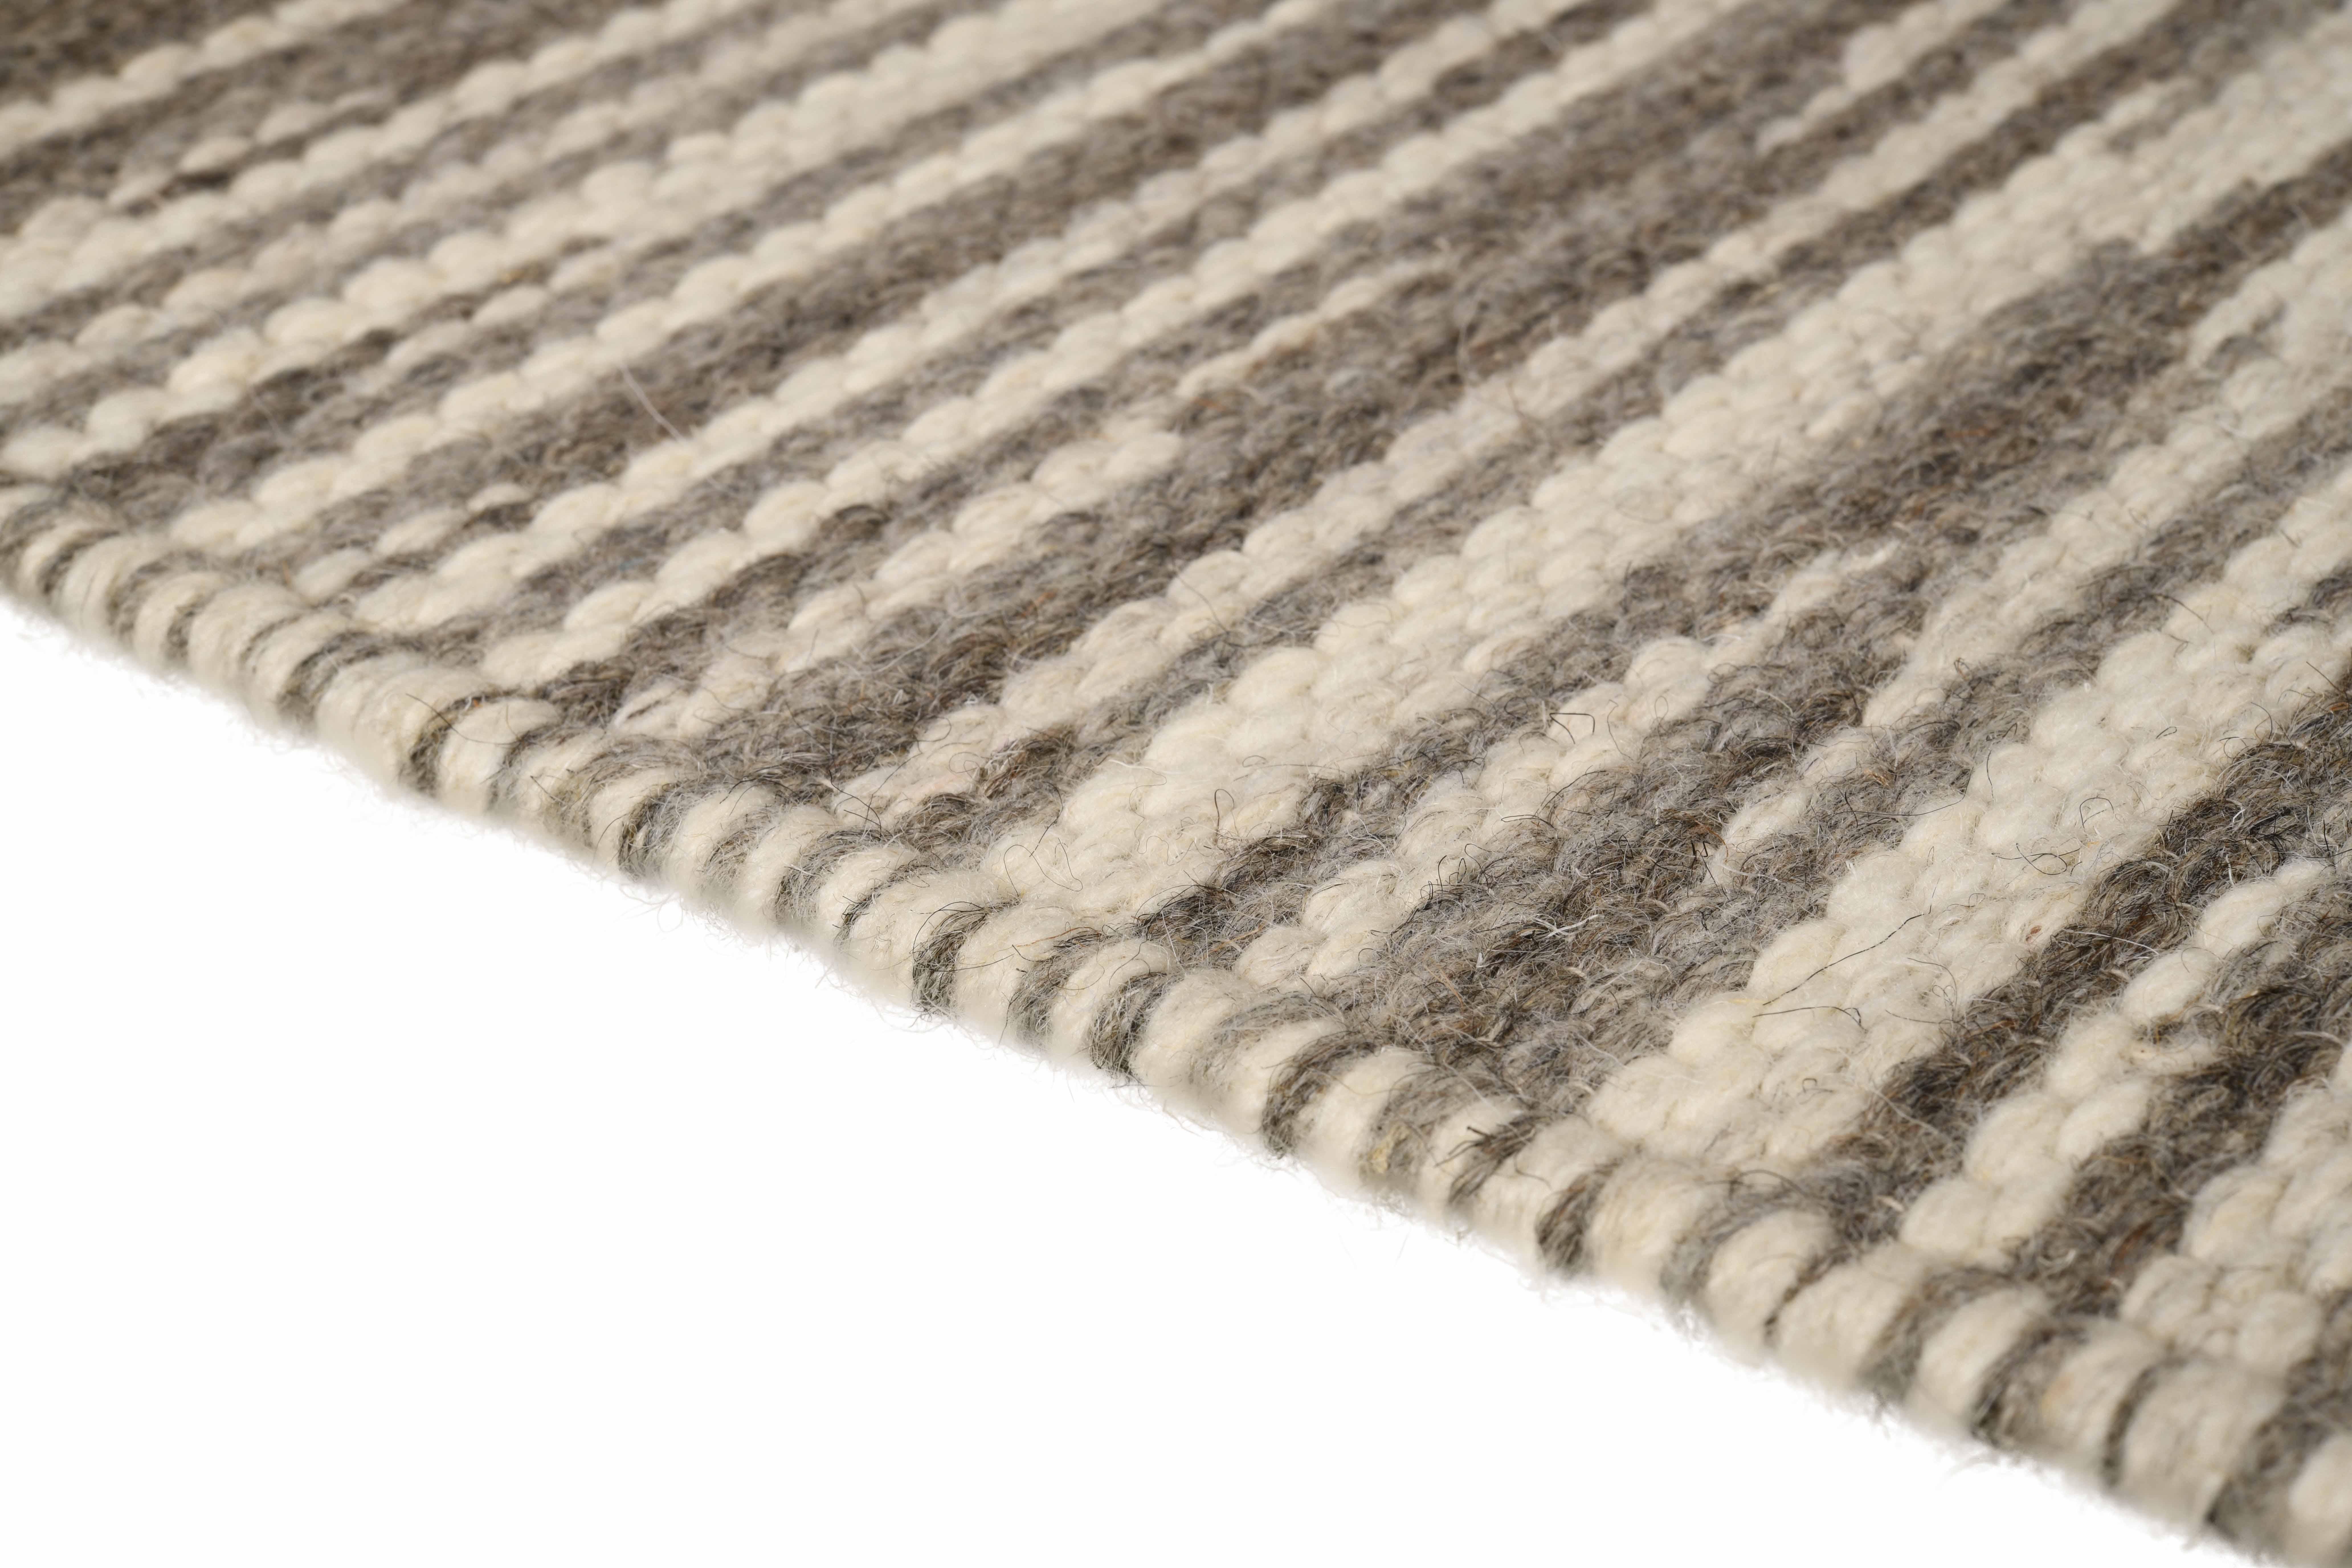 Rivus takes us on a journey like a graceful stream flowing aimlessly through the valleys. Undulating natural wool yarns meander thoughtfully through the high and low neutral tones, coalescing towards a subtle yet striking linear design.
